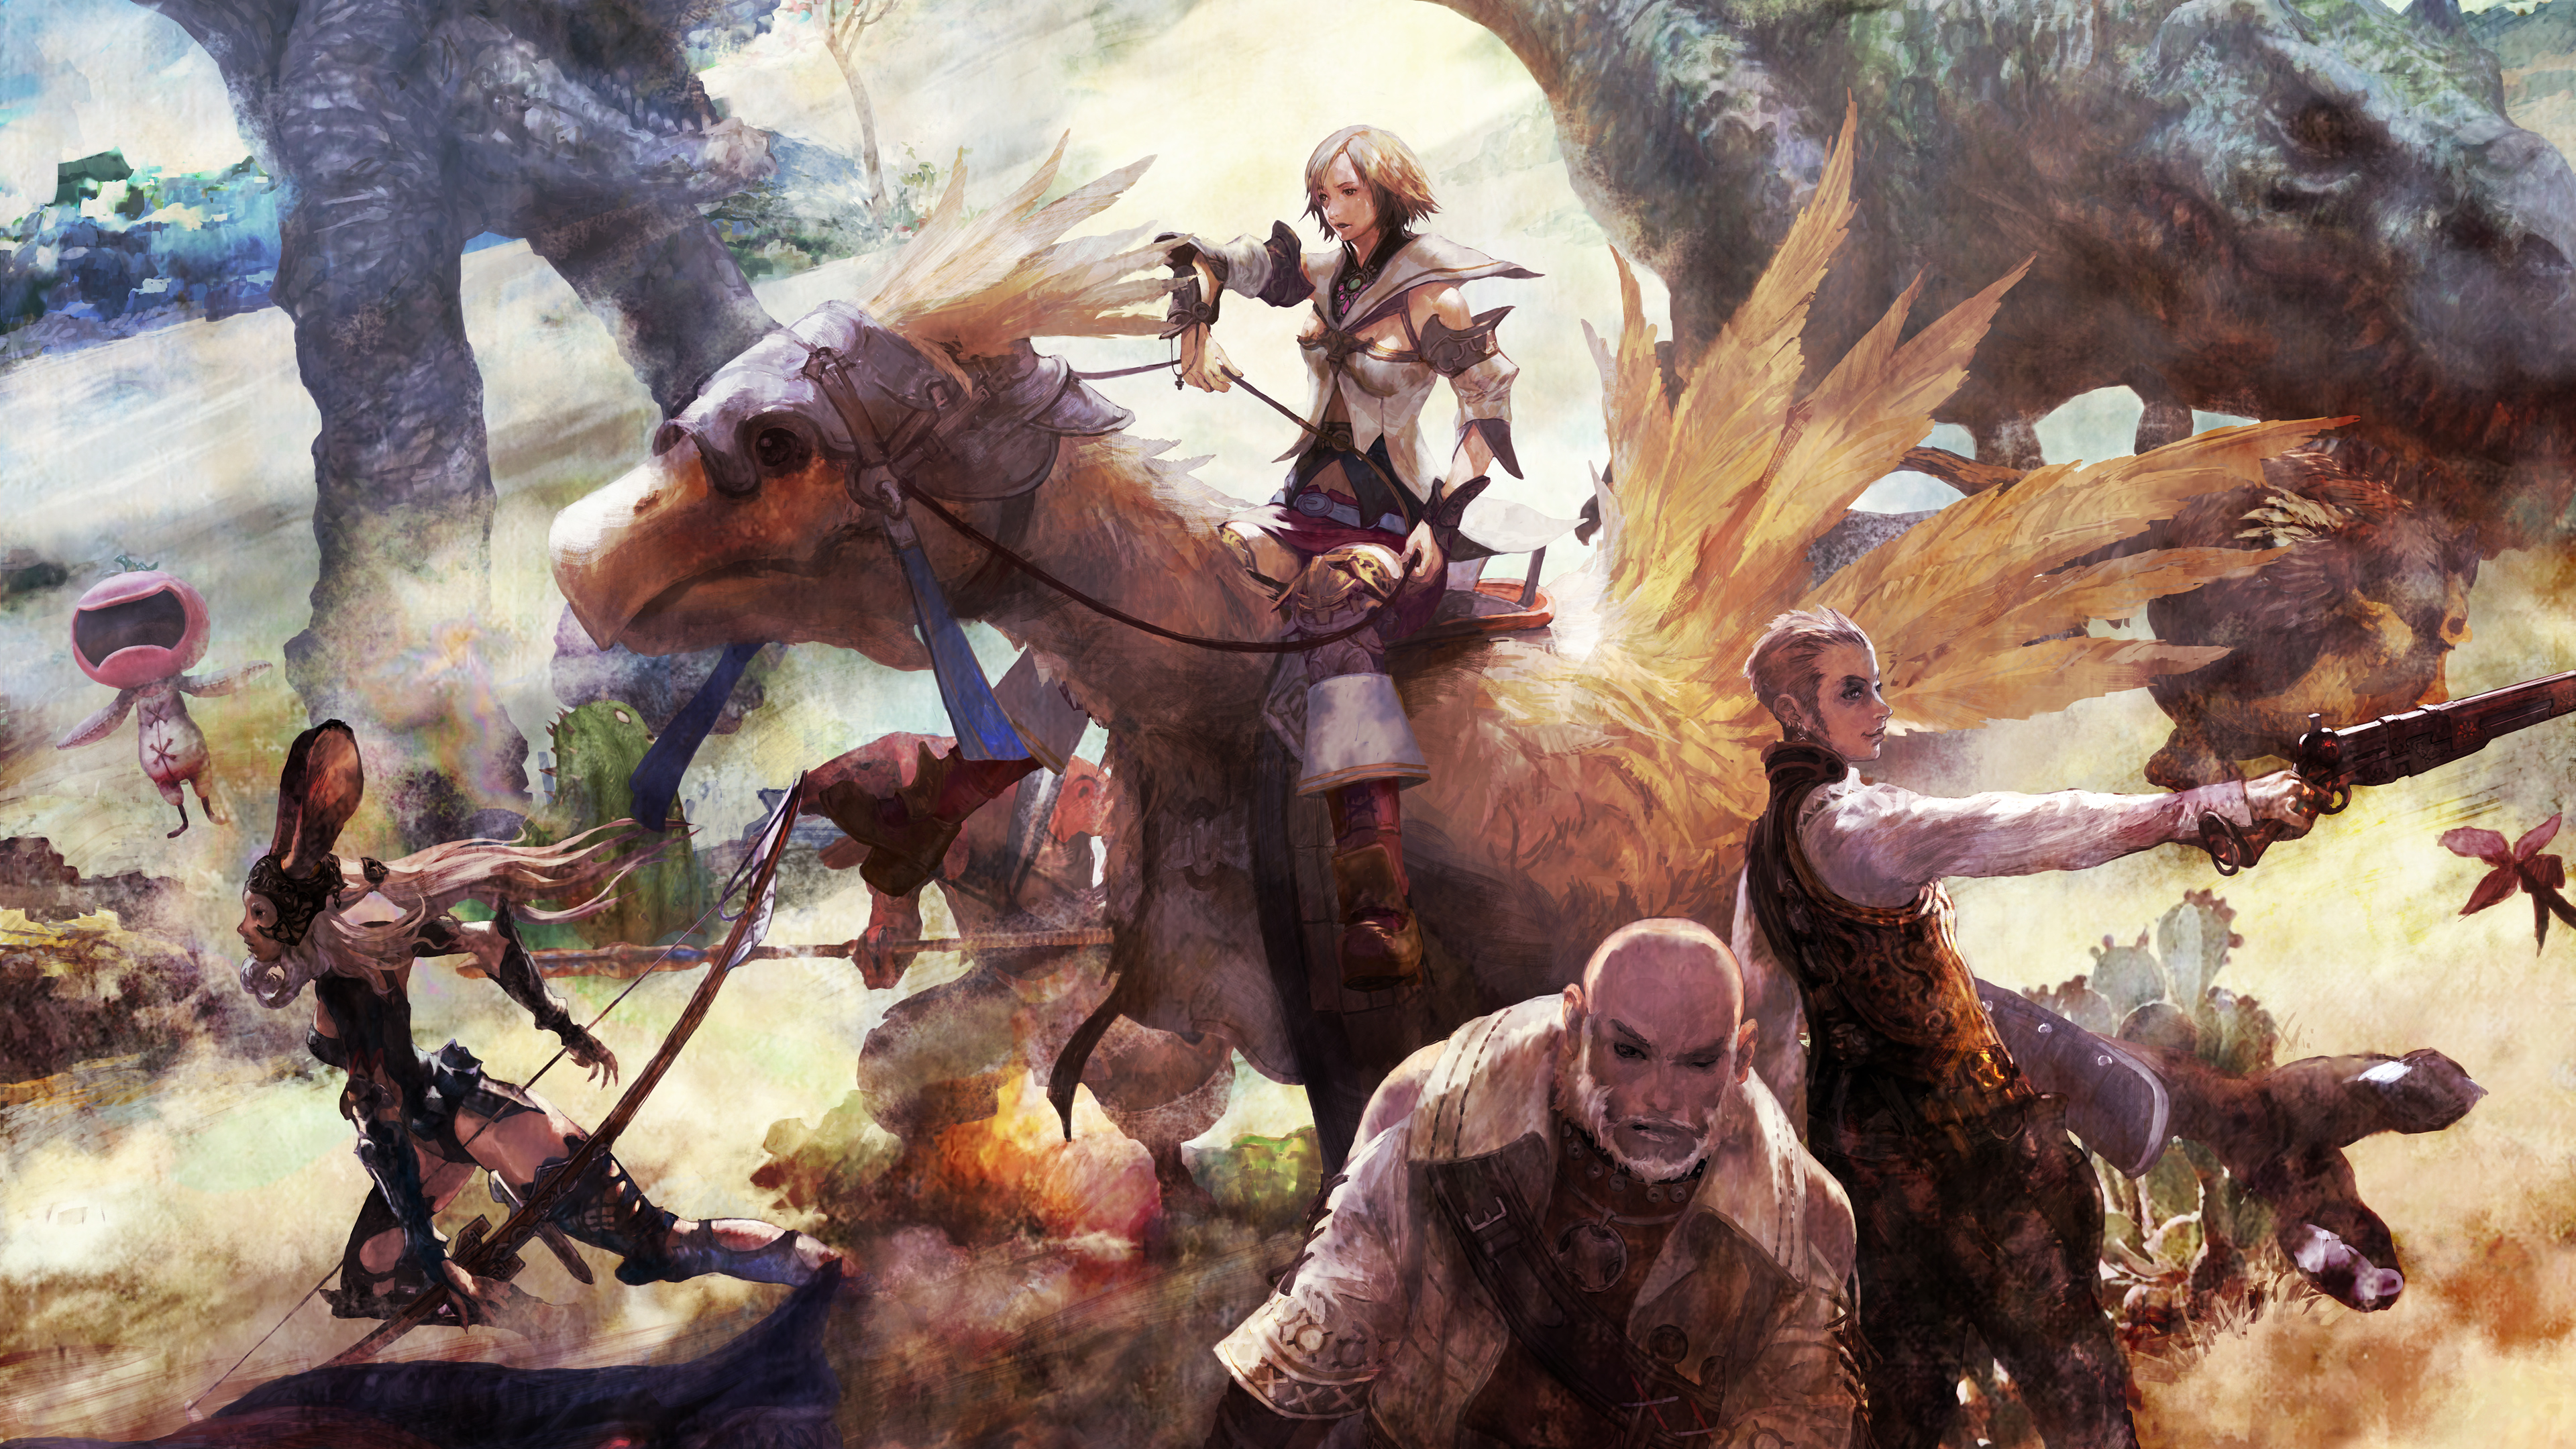 2560x1440 Final Fantasy Xii The Zodiac Age 1440p Resolution Wallpaper Hd Games 4k Wallpapers Images Photos And Background